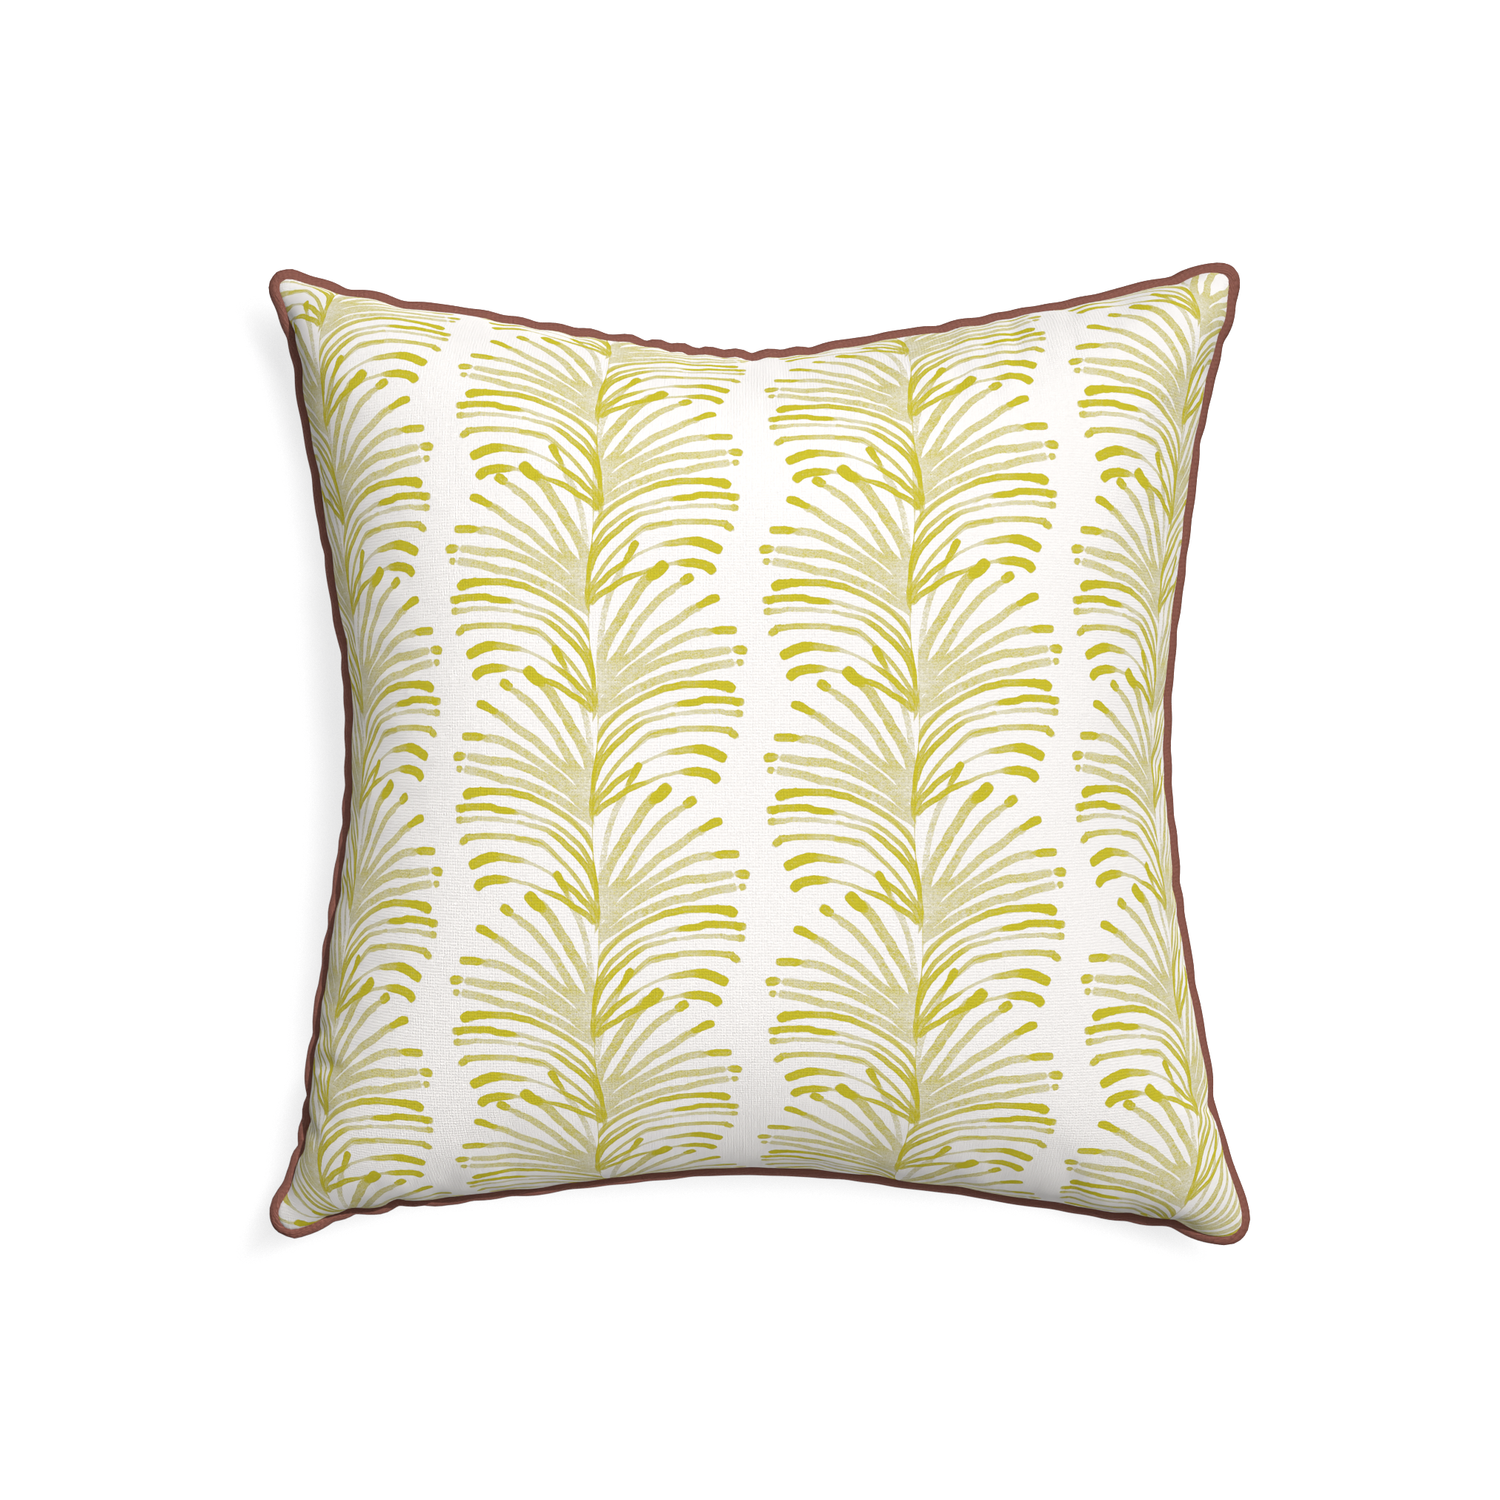 22-square emma chartreuse custom pillow with w piping on white background